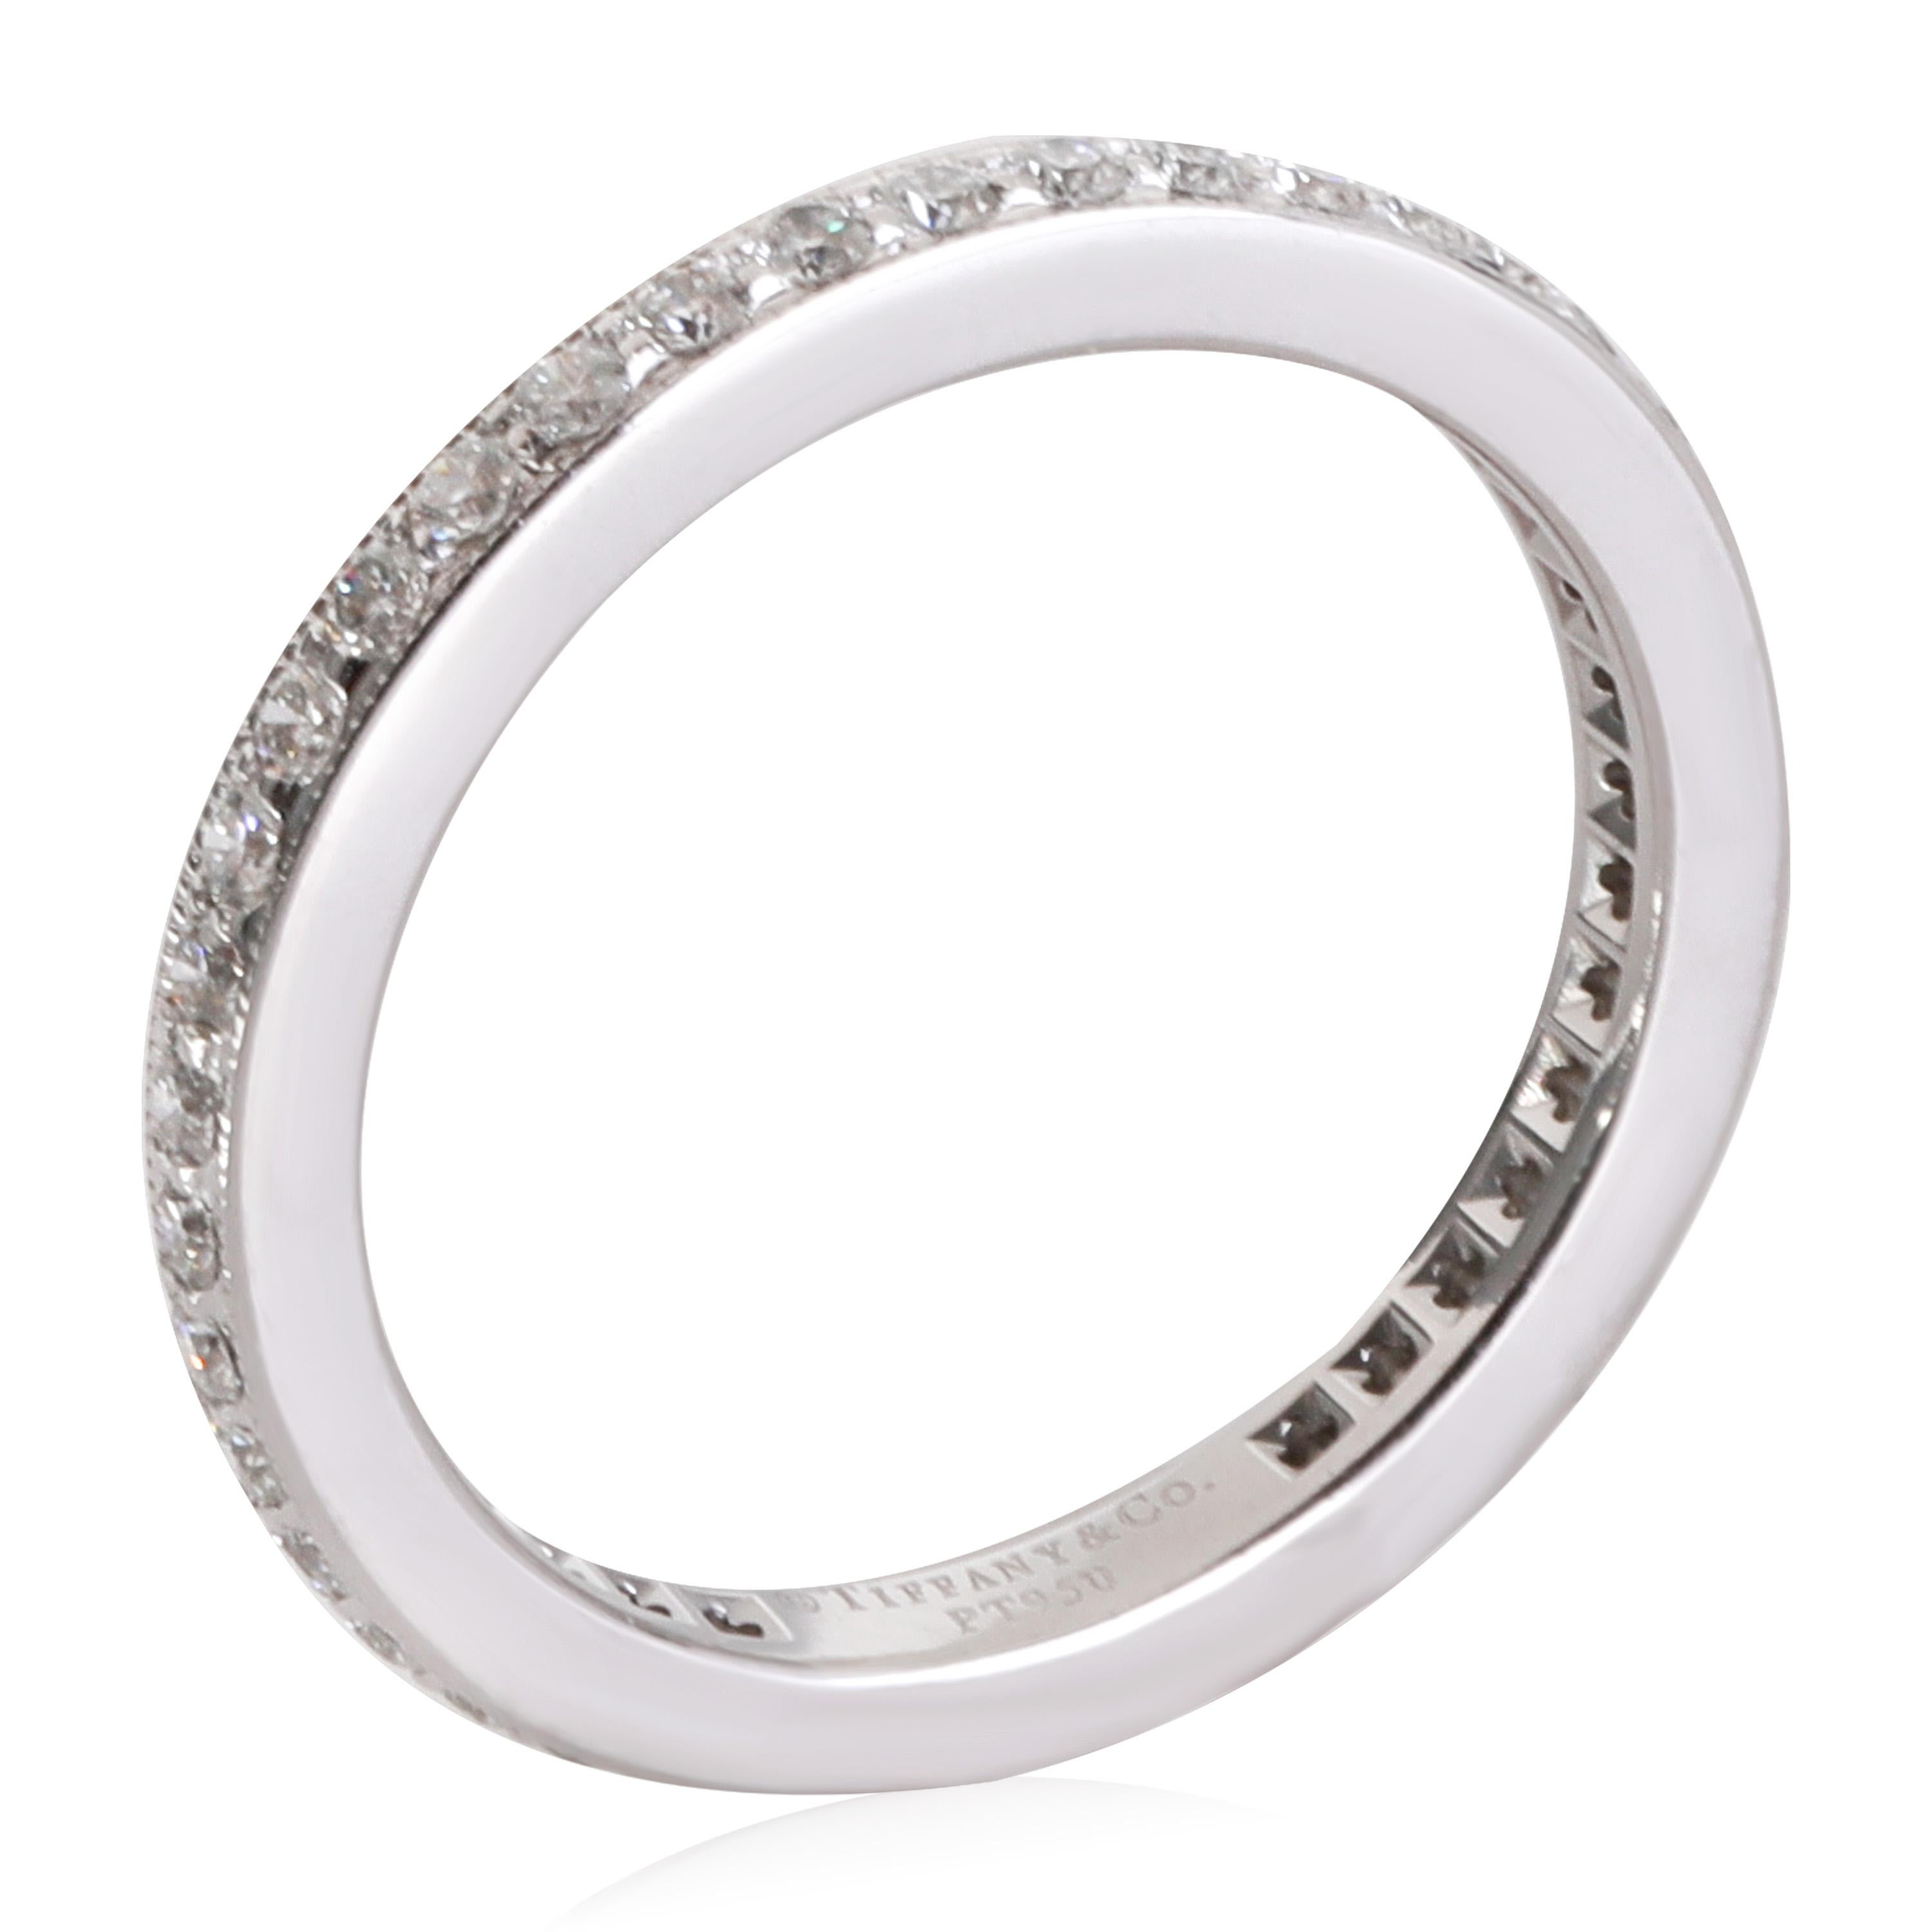 Tiffany & Co. Legacy Diamond Eternity Band in Platinum 0.75 CTW

PRIMARY DETAILS
SKU: 119170
Listing Title: Tiffany & Co. Legacy Diamond Eternity Band in Platinum 0.75 CTW
Condition Description: Retails for 4350 USD. In excellent condition and